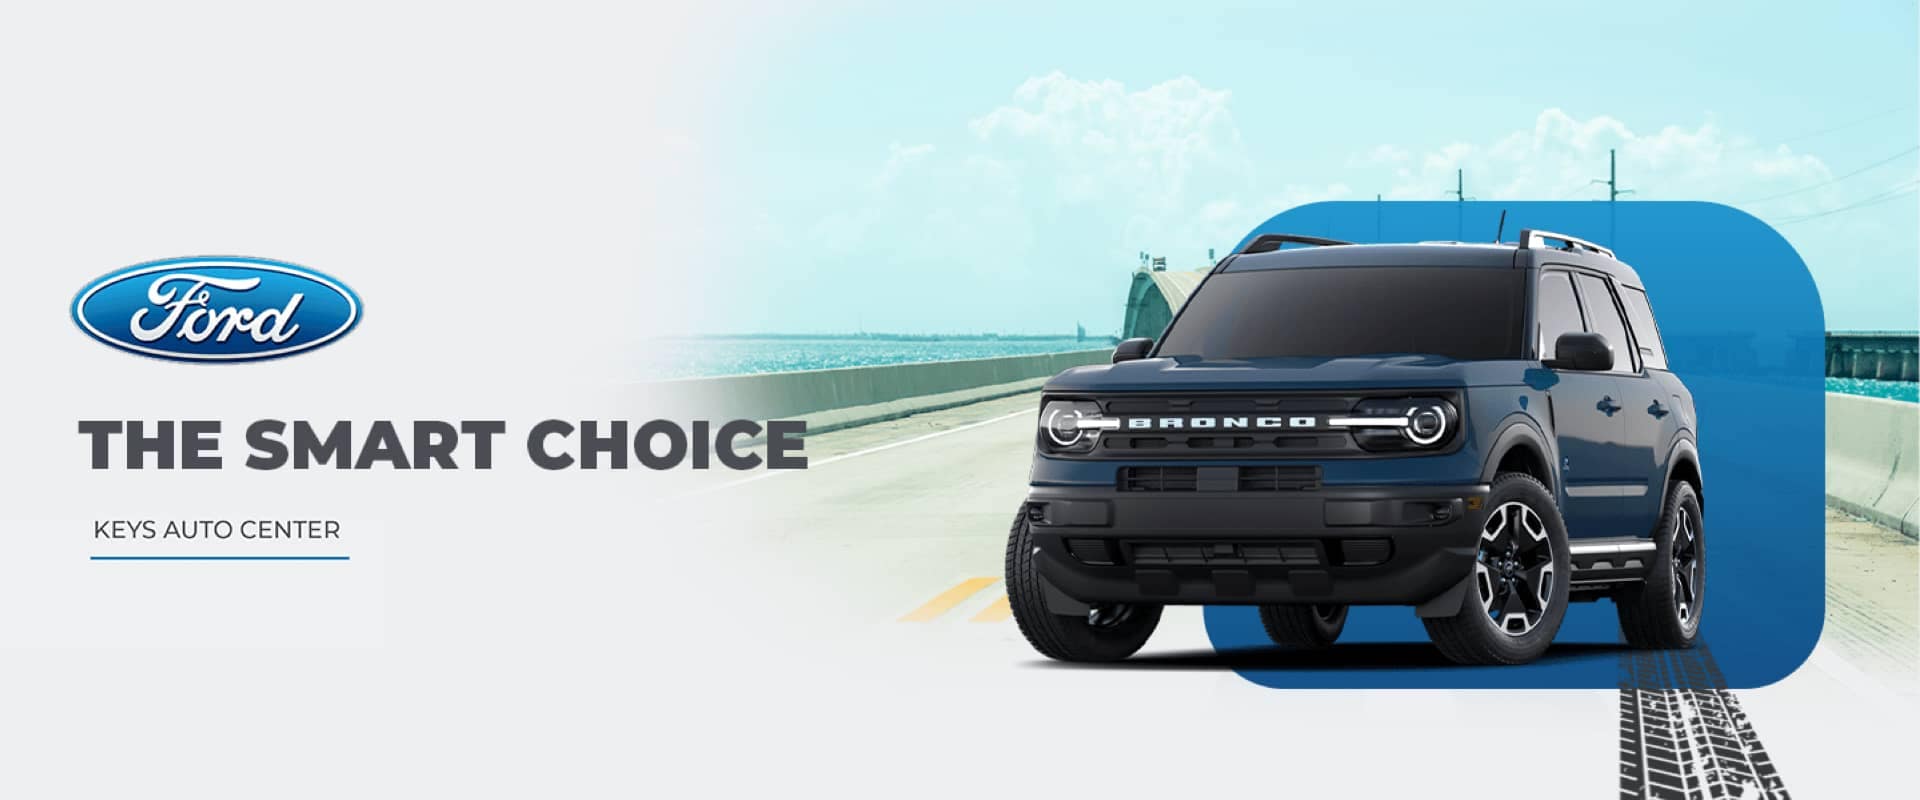 The Smart Choice for Ford Vehicles - Keys Auto Center